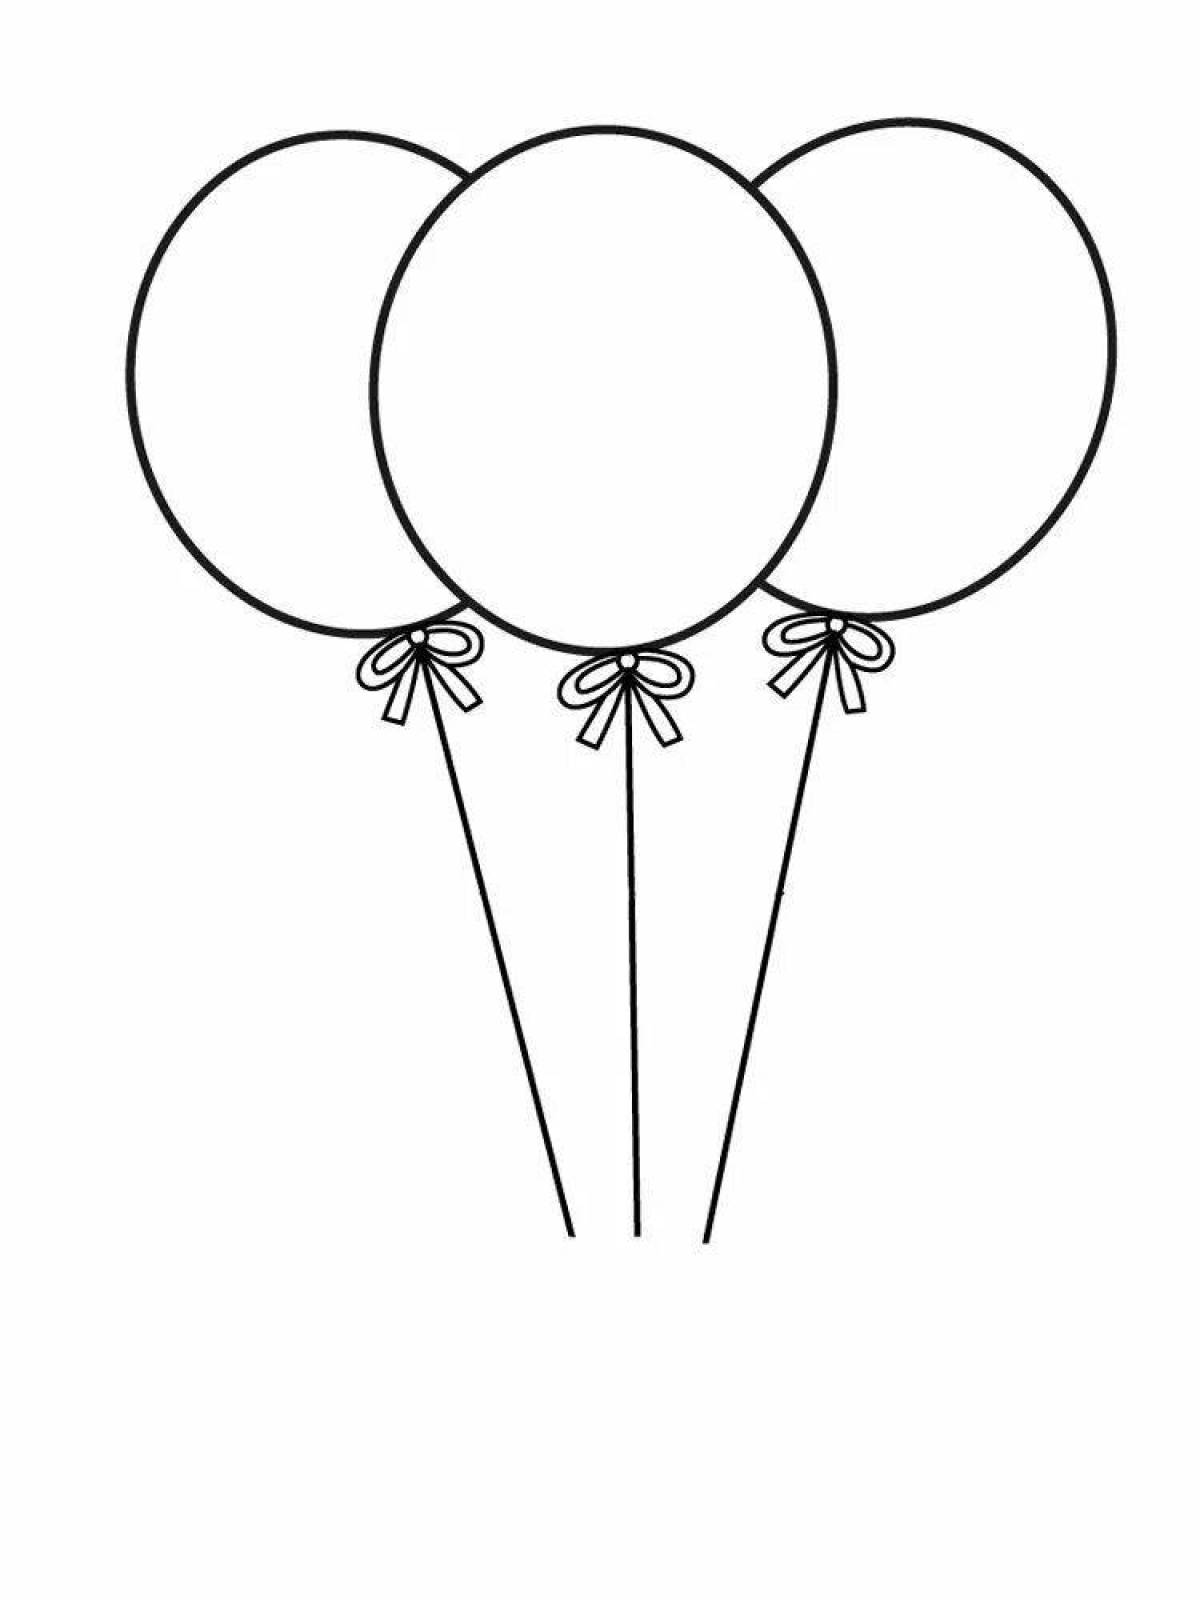 Great balloon coloring book